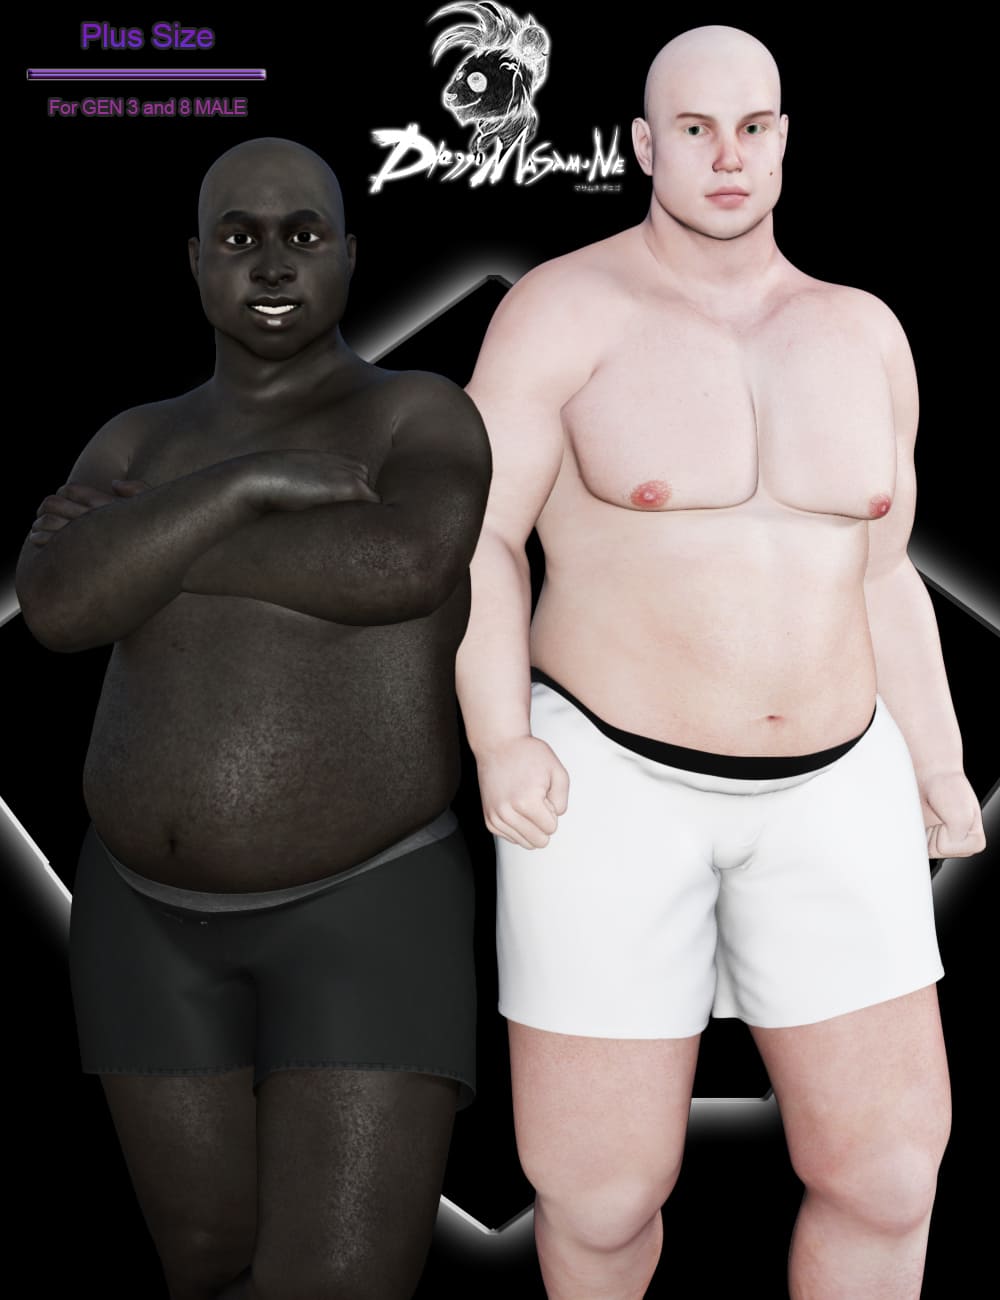 Plus Size for Genesis 3 and 8 Male_DAZ3D下载站